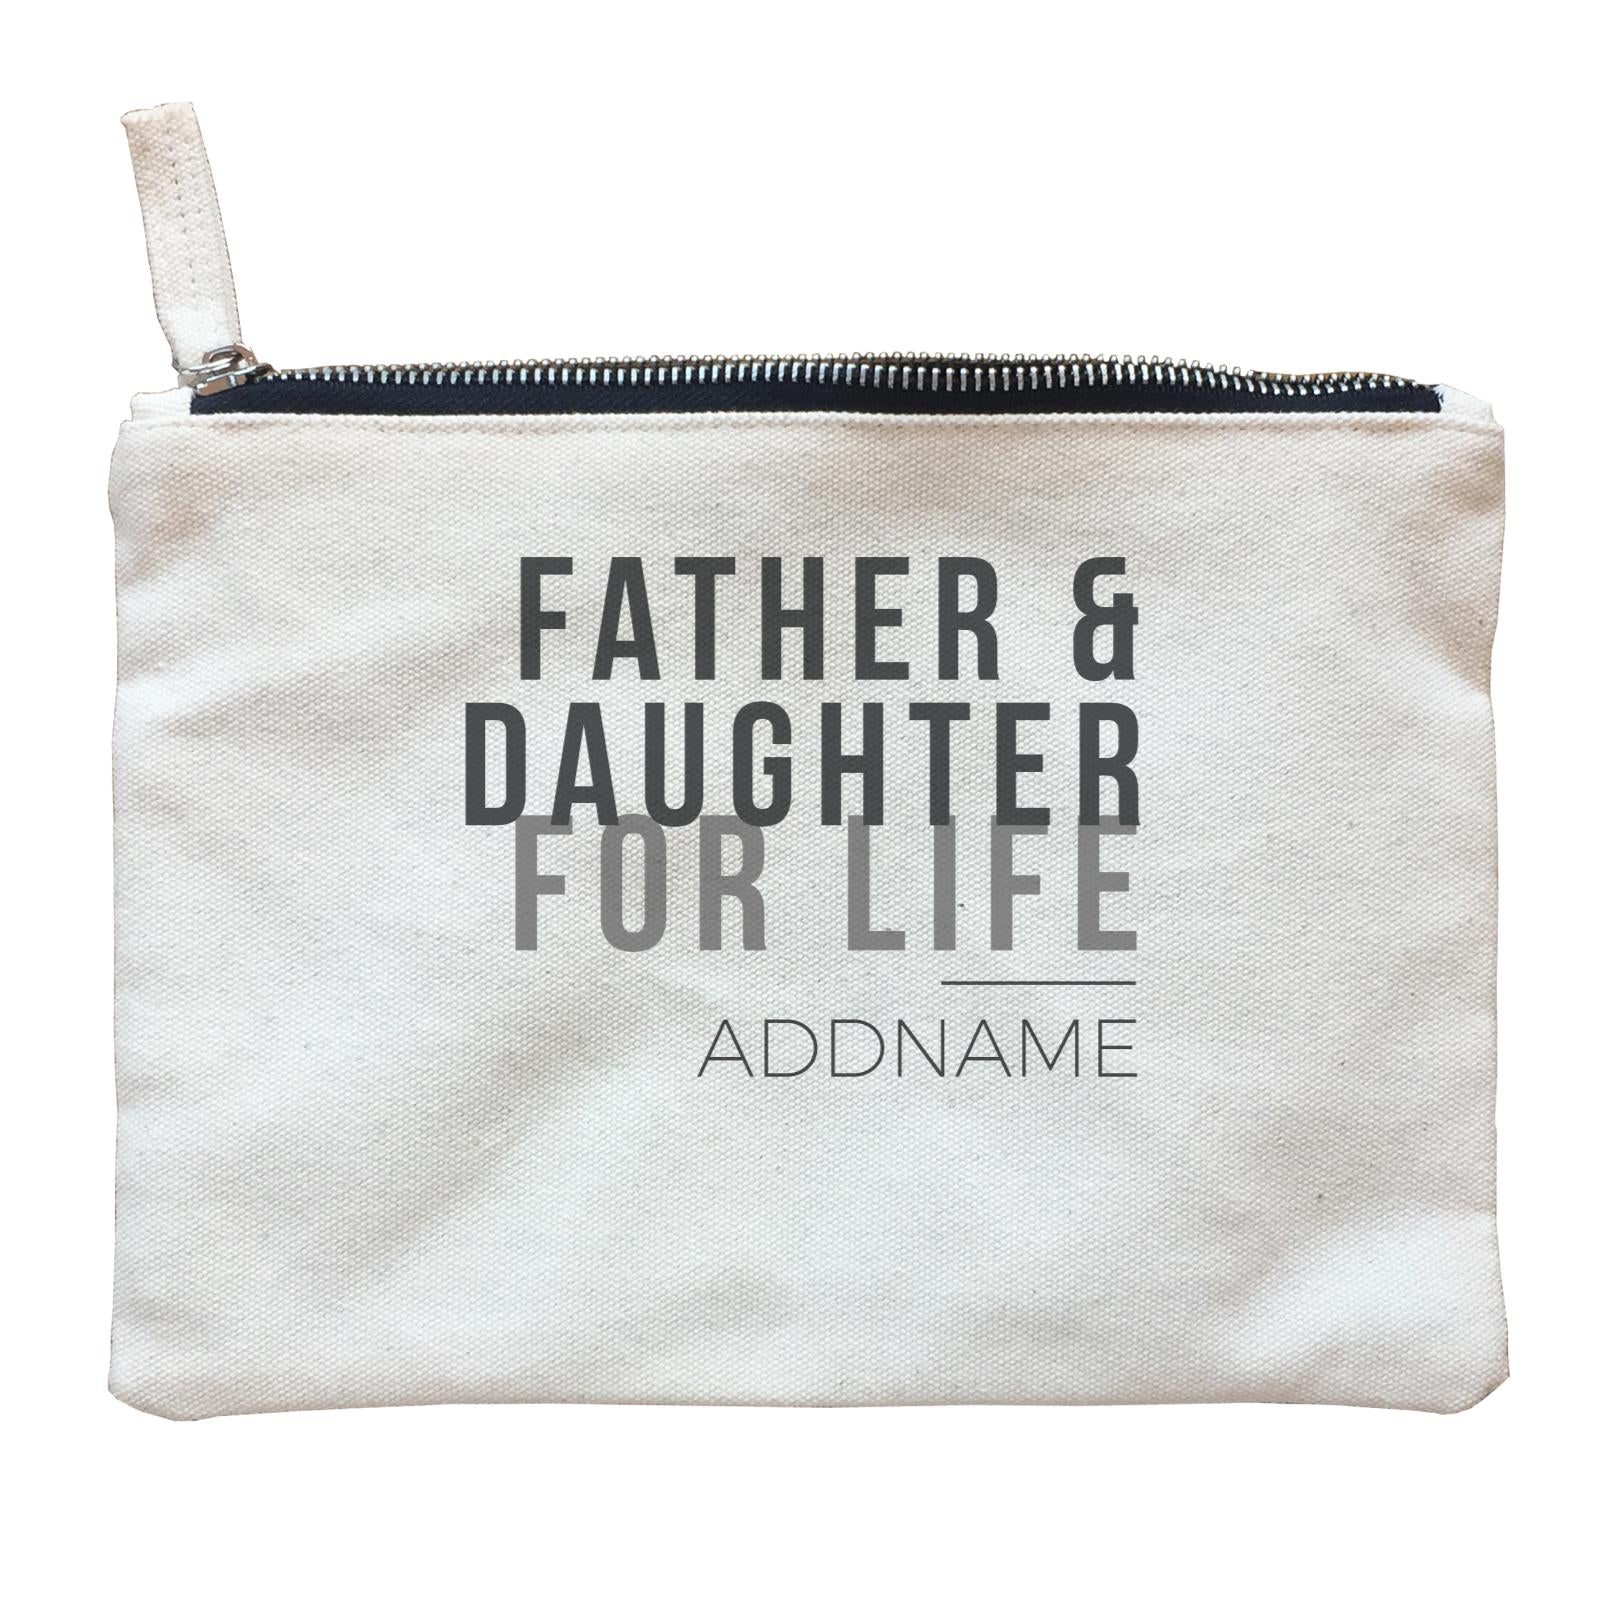 Family For Life Father & Daughter For Life Addname Zipper Pouch